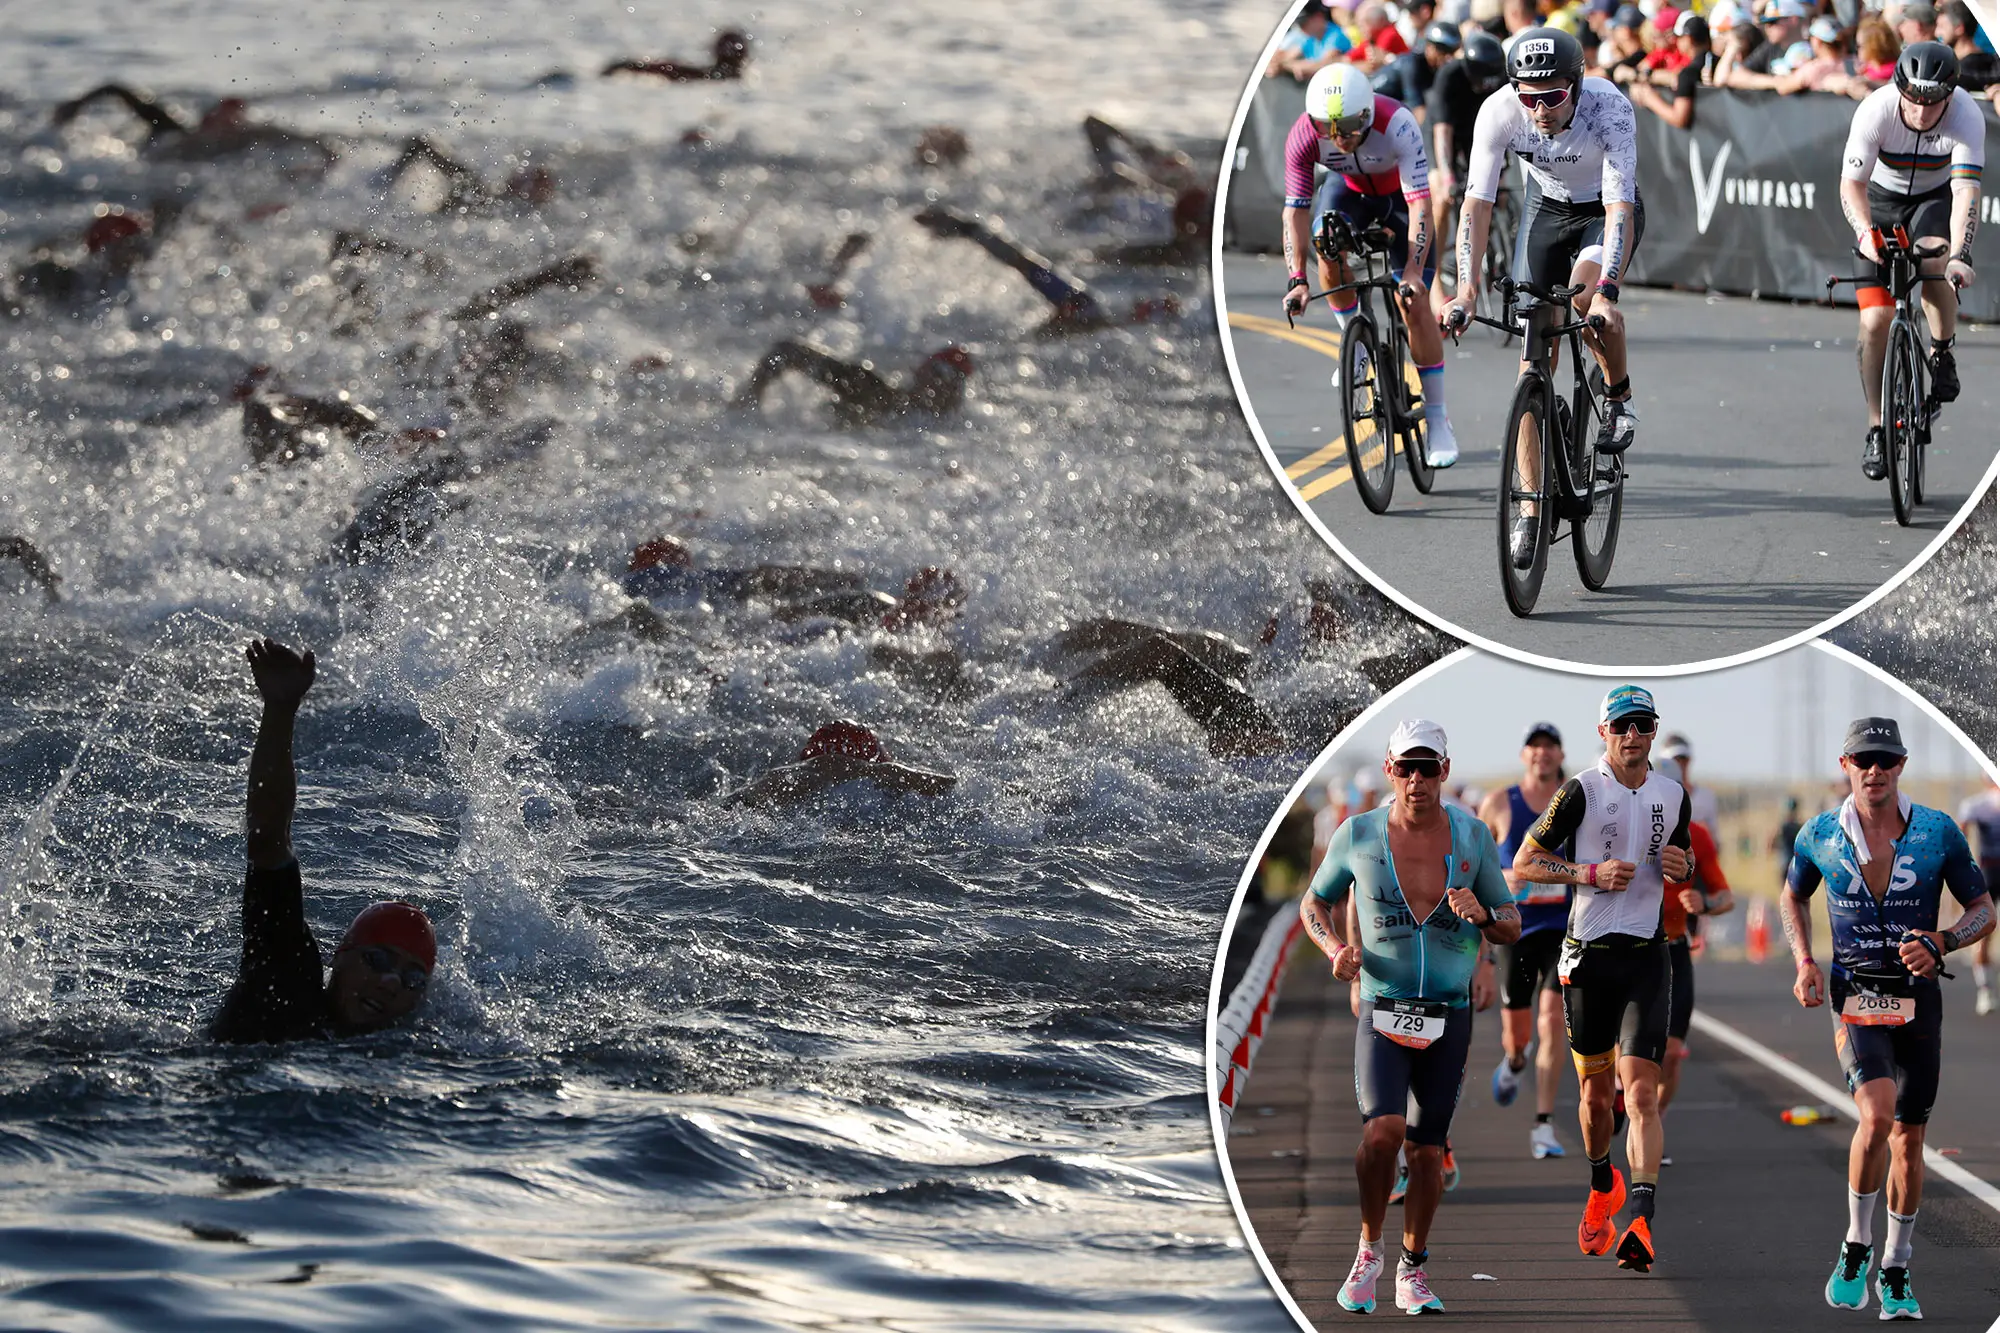 The Mighty Ironman Triathlon: Pushing Athletes to Their Limits